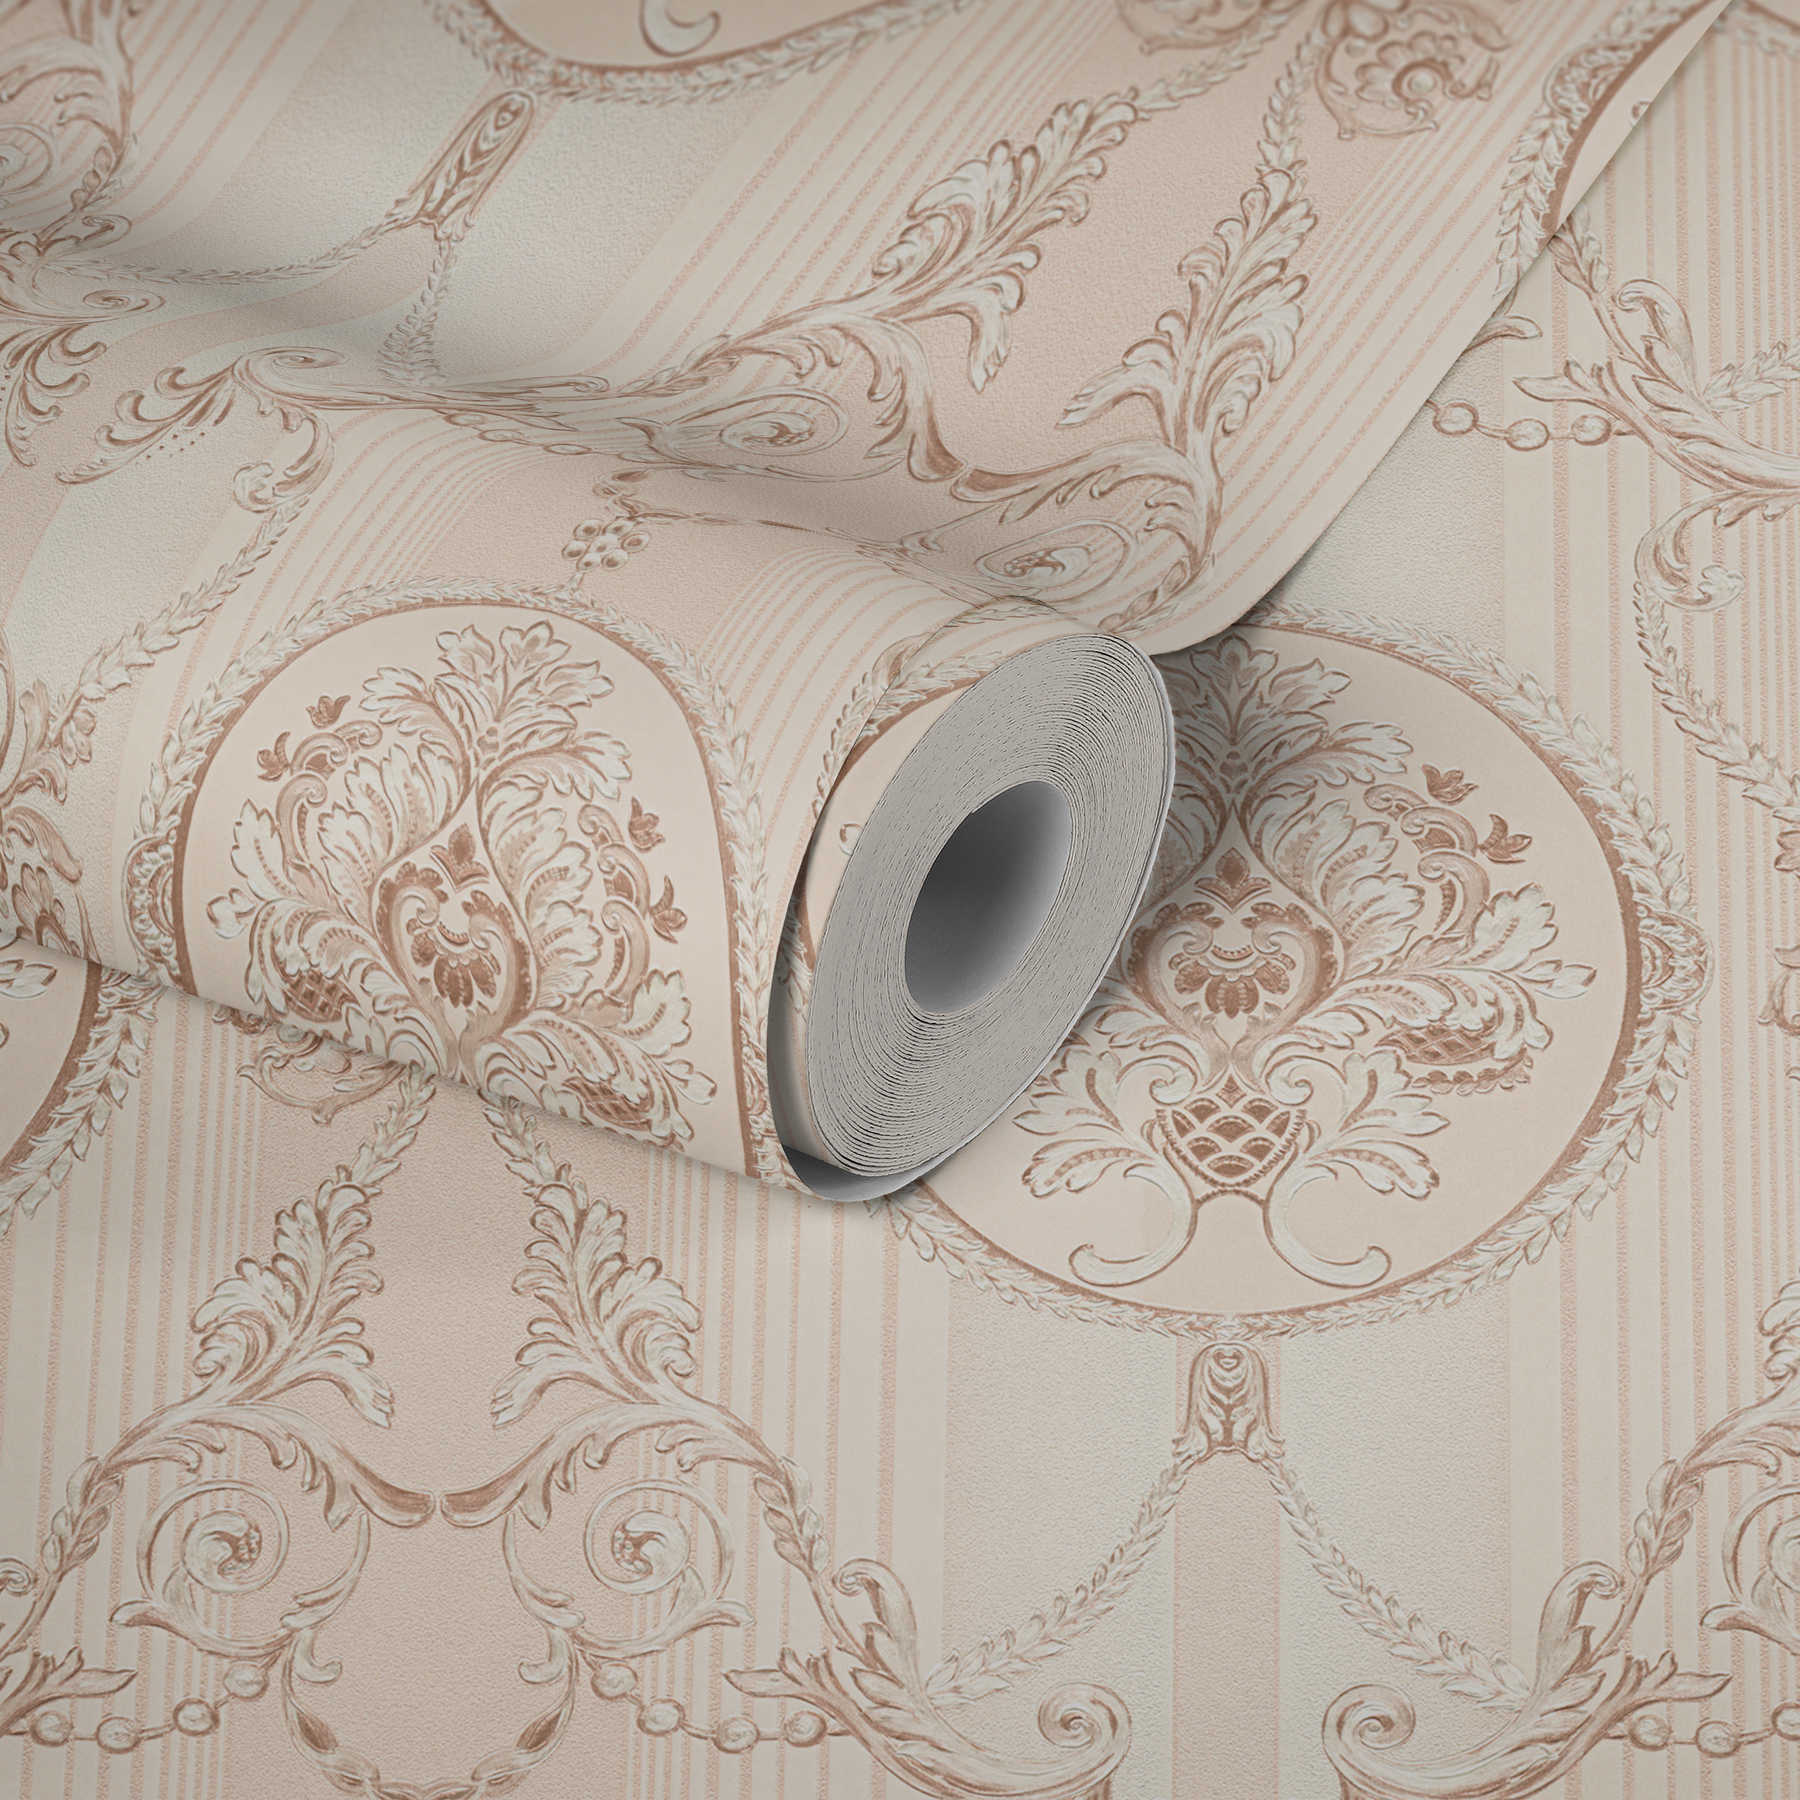             Neo baroque wallpaper with ornamental pattern & stripes - cream, pink
        